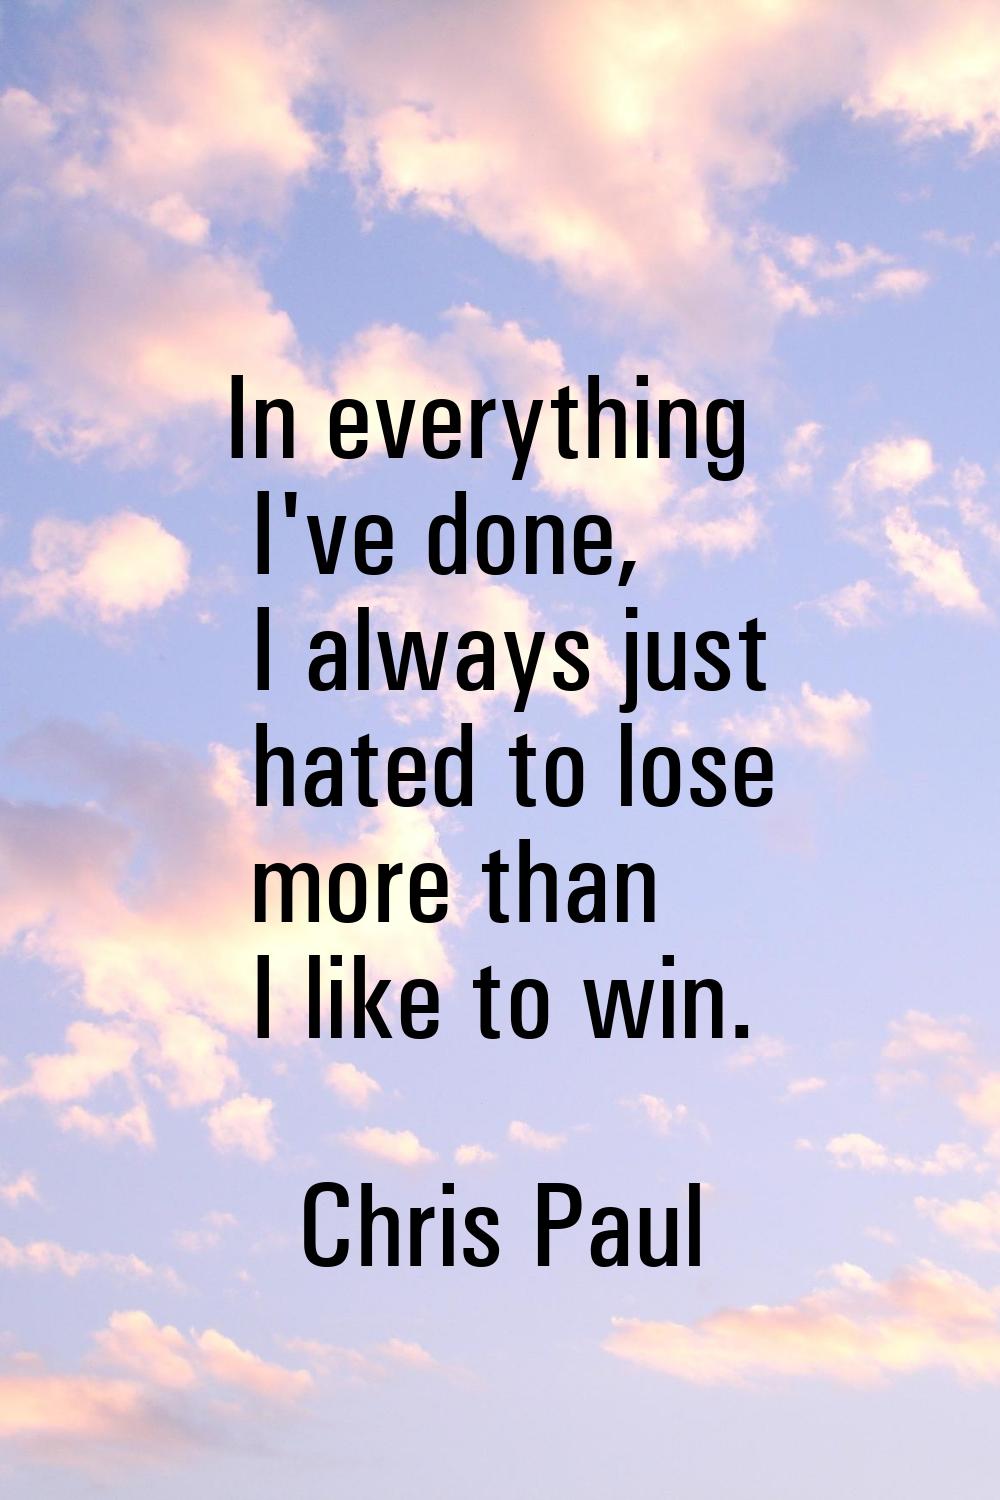 In everything I've done, I always just hated to lose more than I like to win.